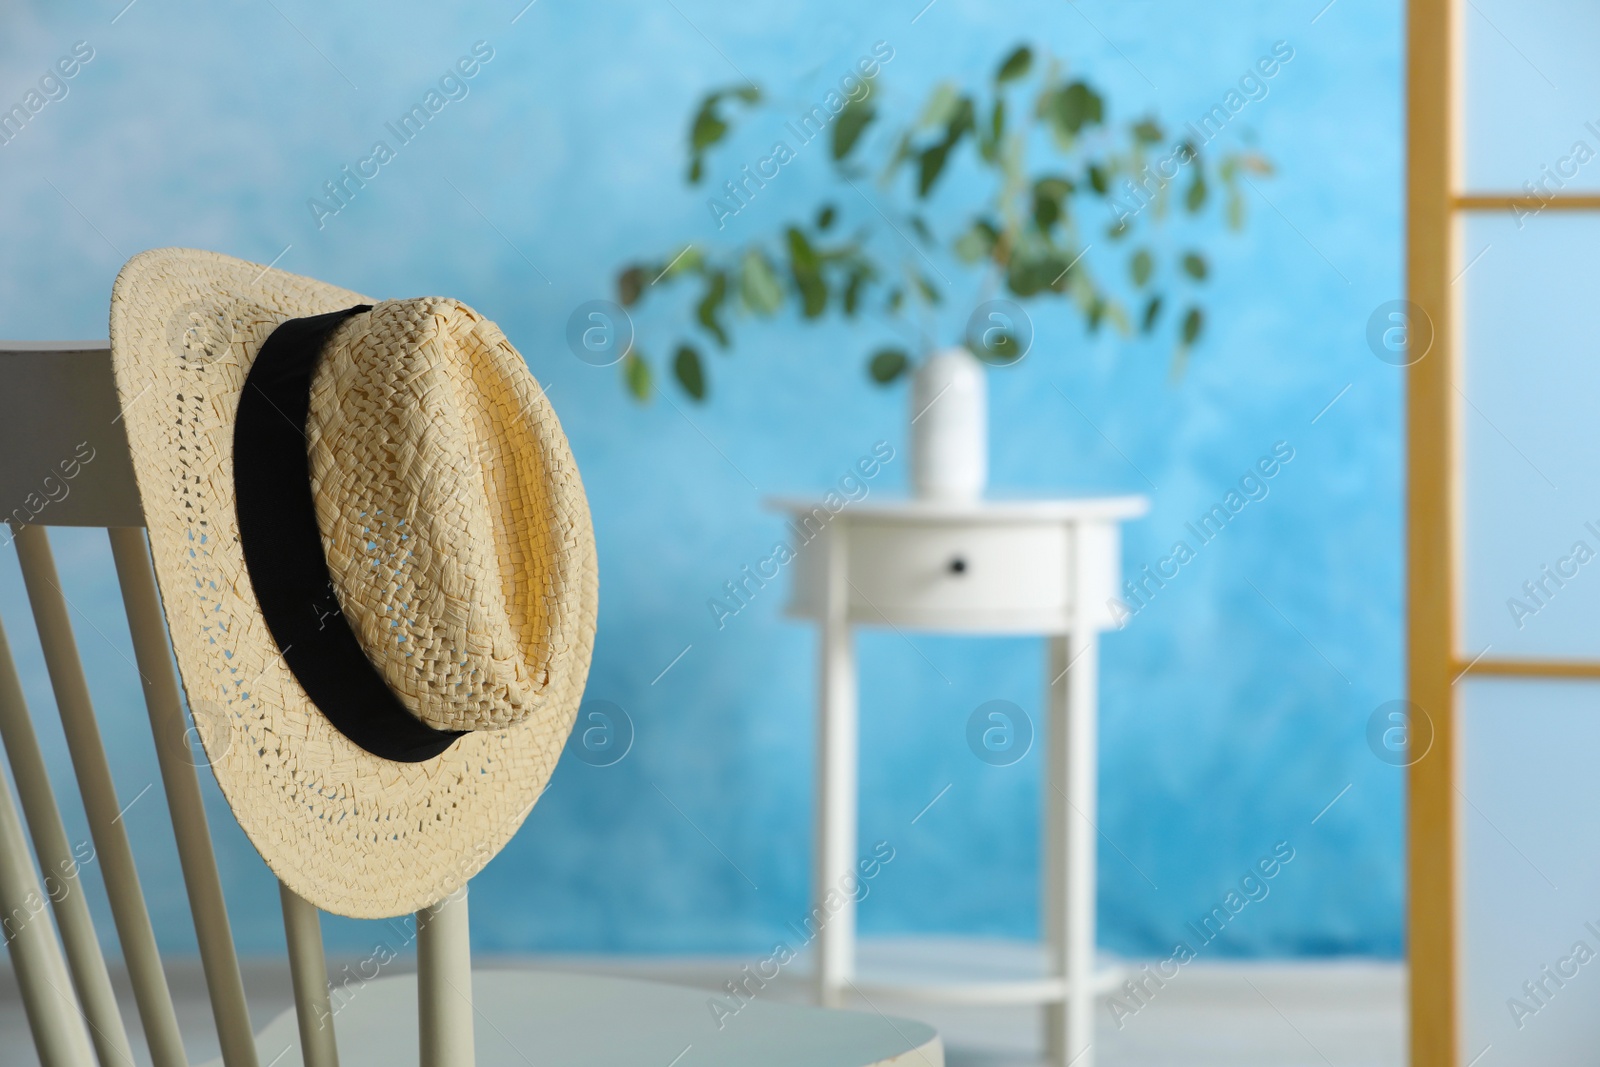 Photo of Stylish straw hat hanging on chair in room, space for text